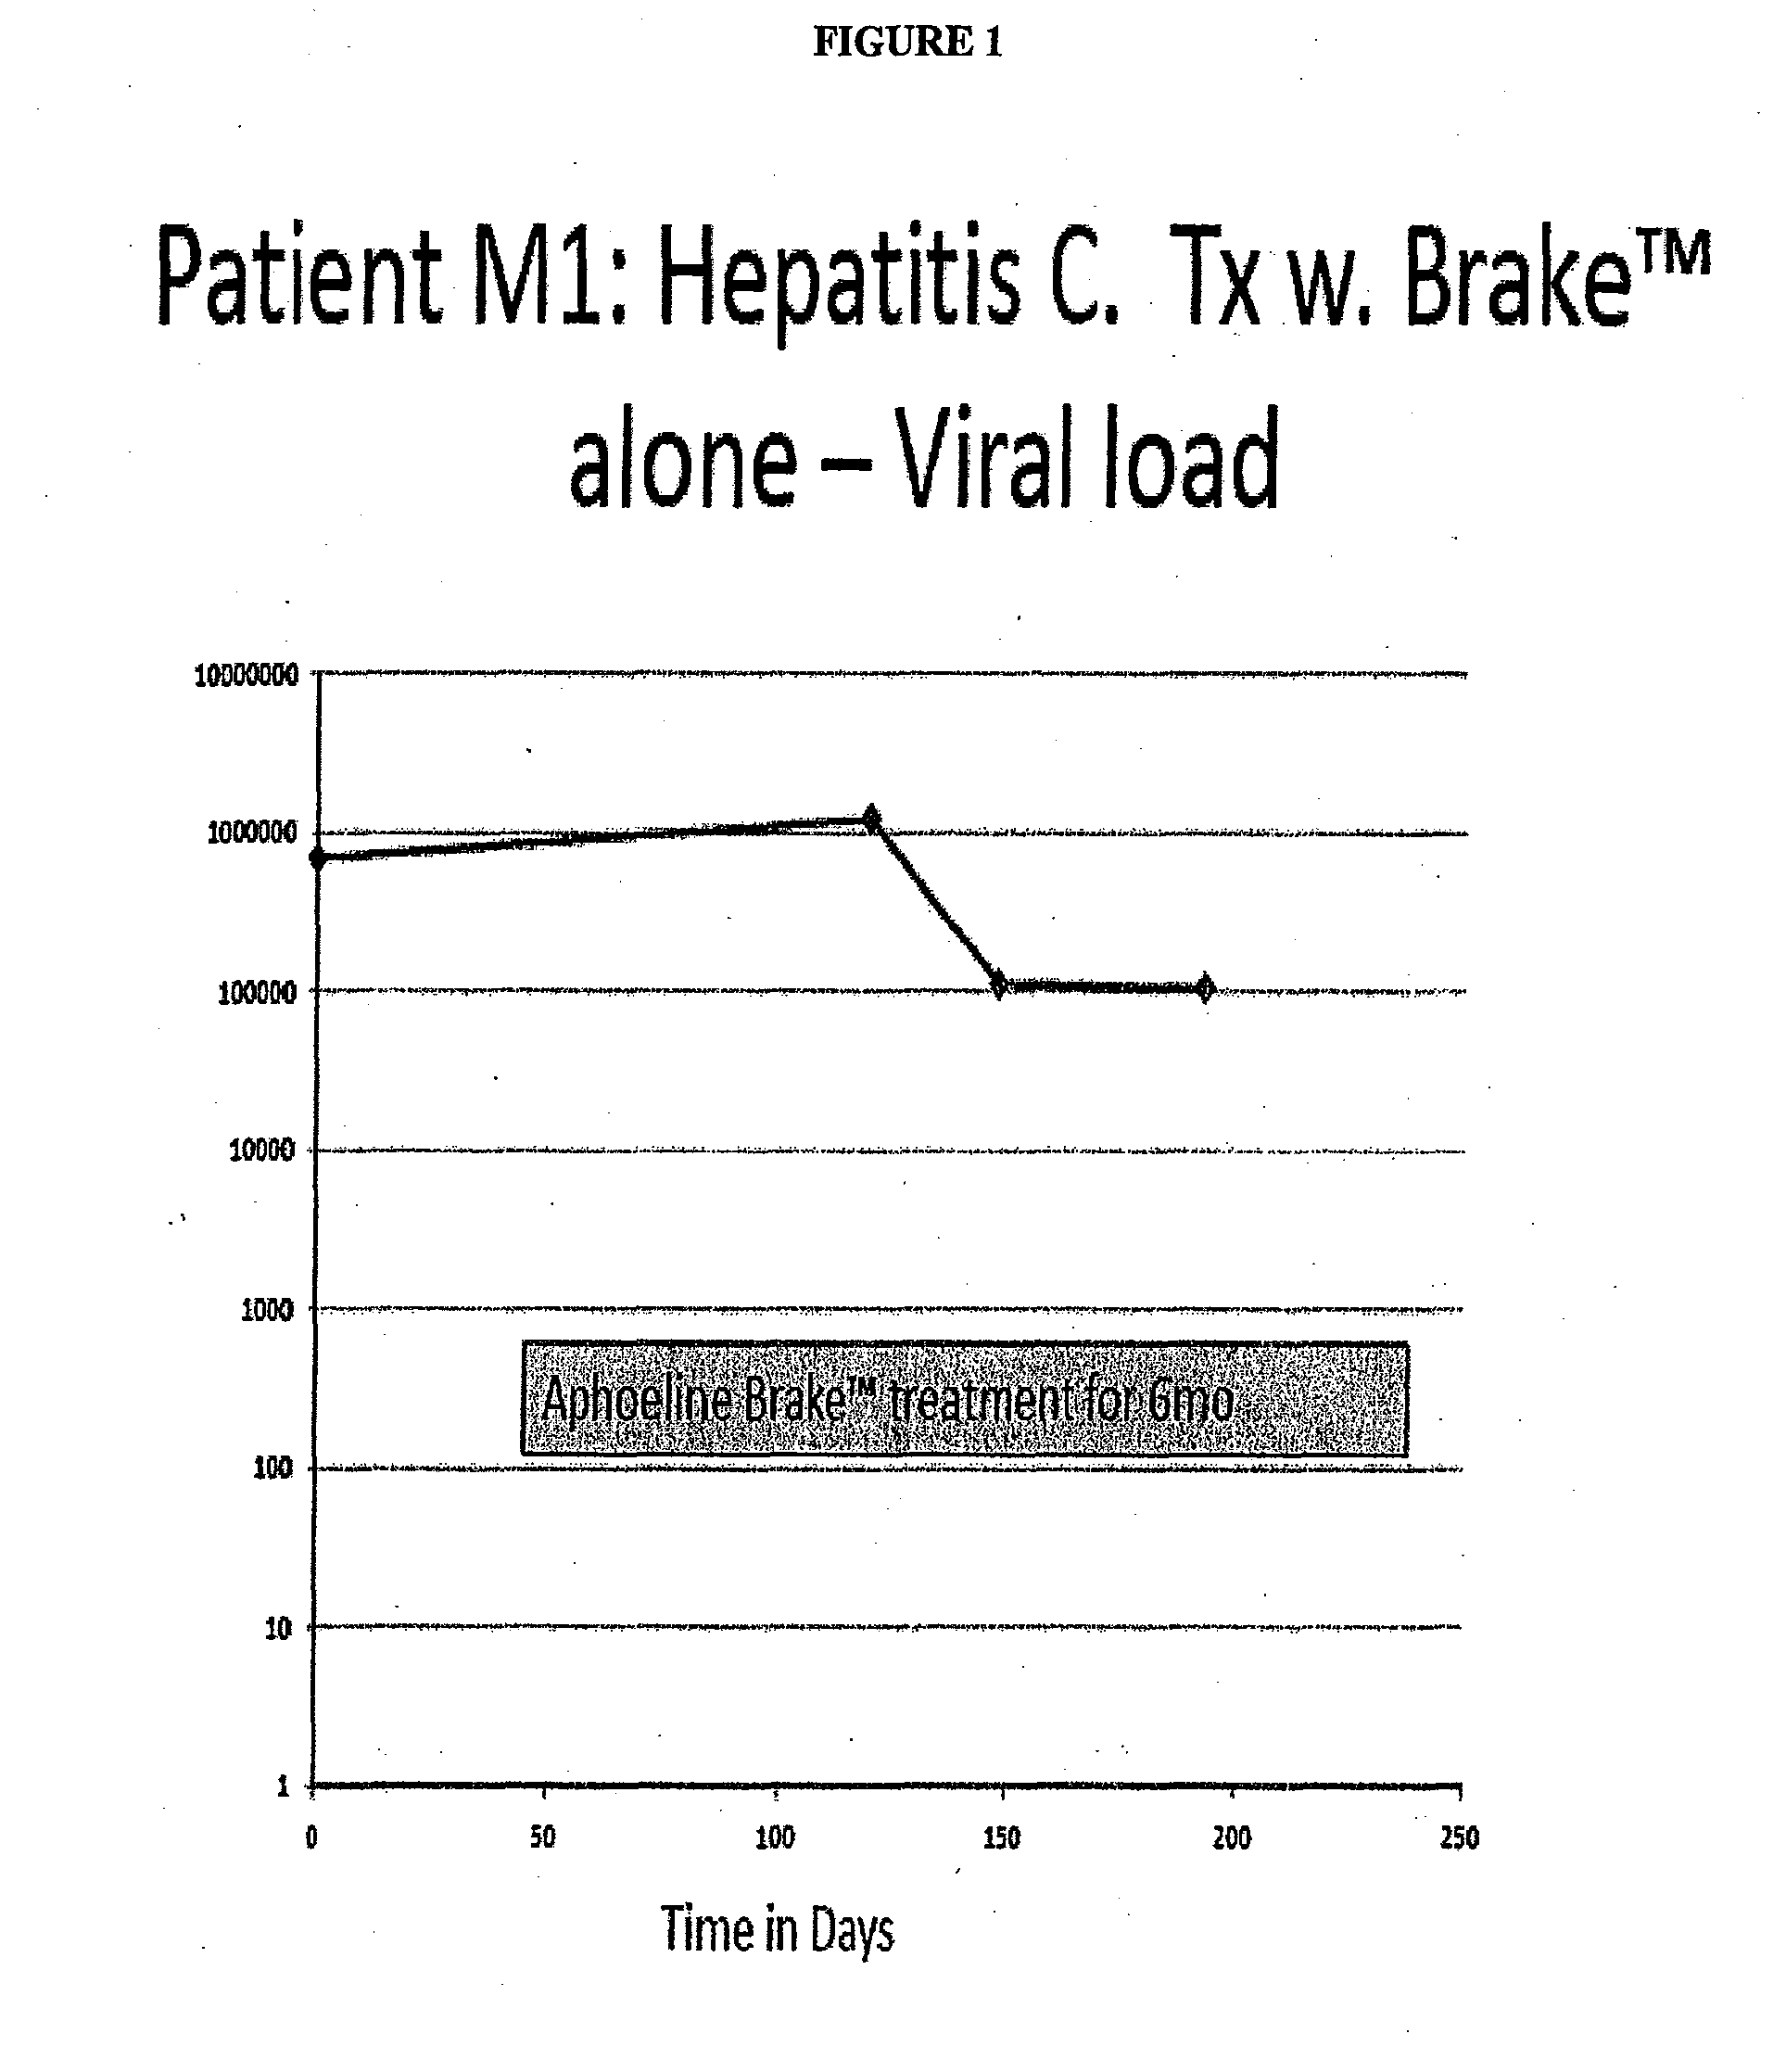 Compositions, methods of treatment and diagnostics for treatment of hepatic steatosis alone or in combination with a hepatitis c virus infection